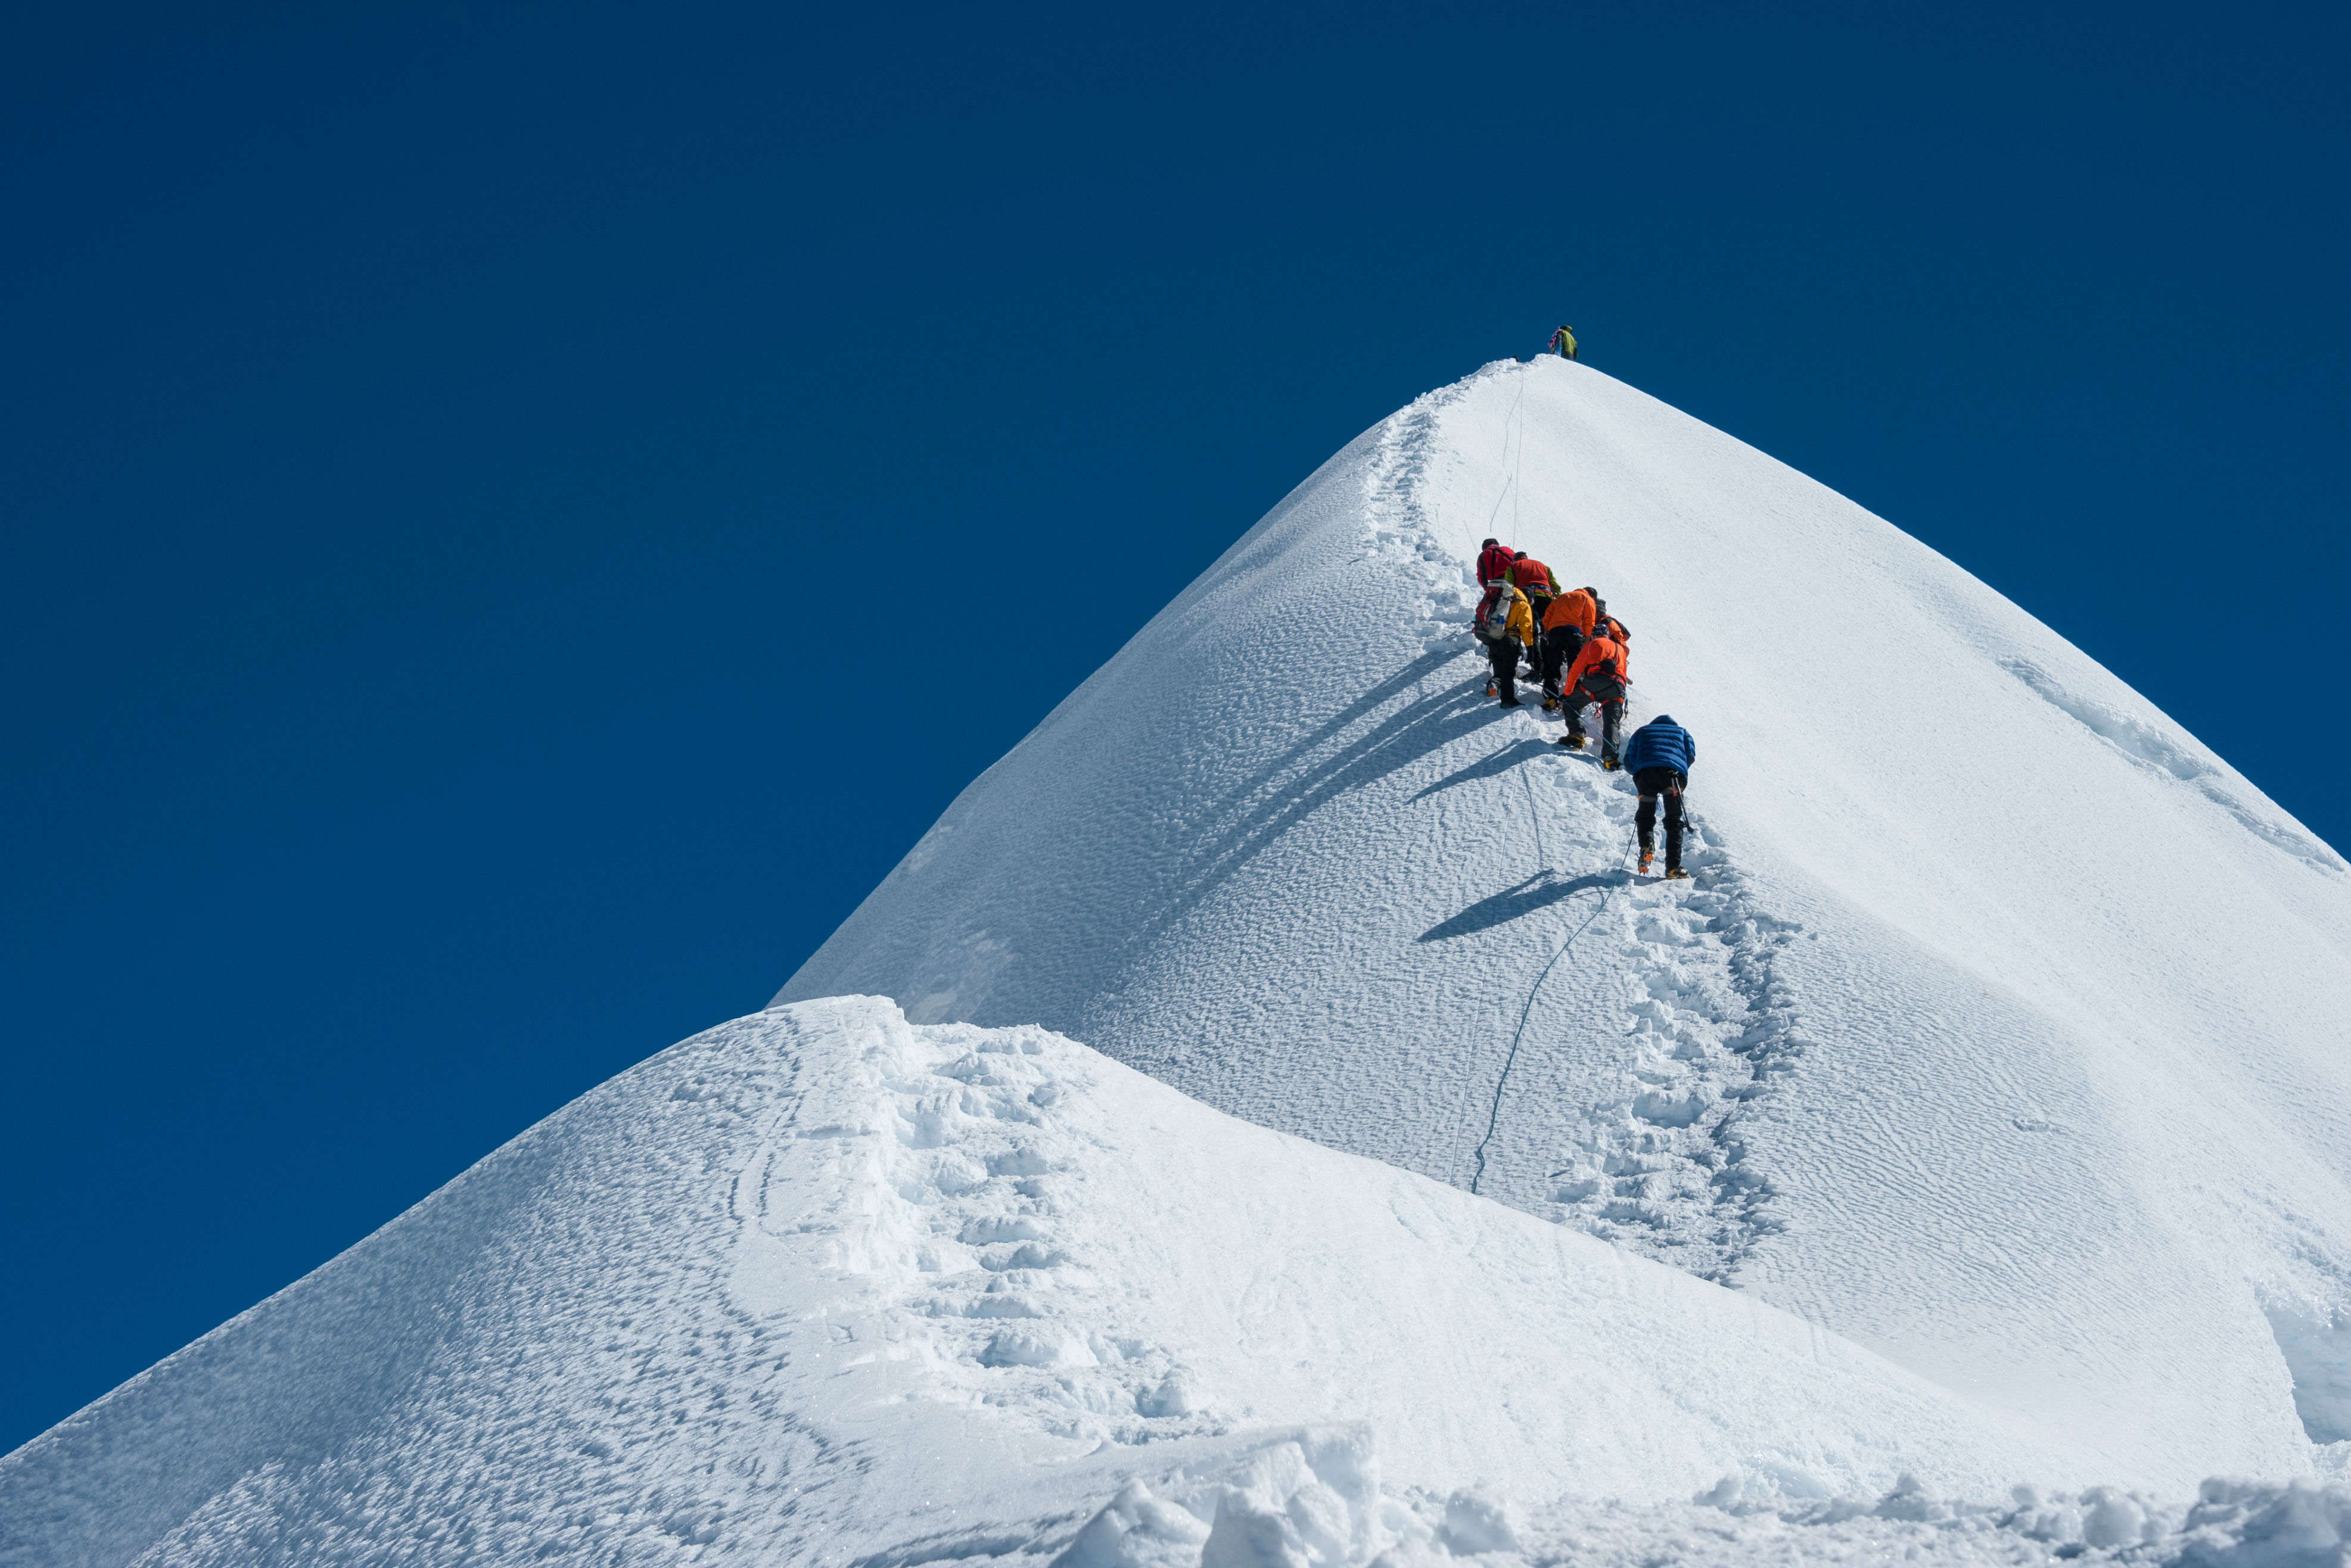 What to know about climbing Mount Everest